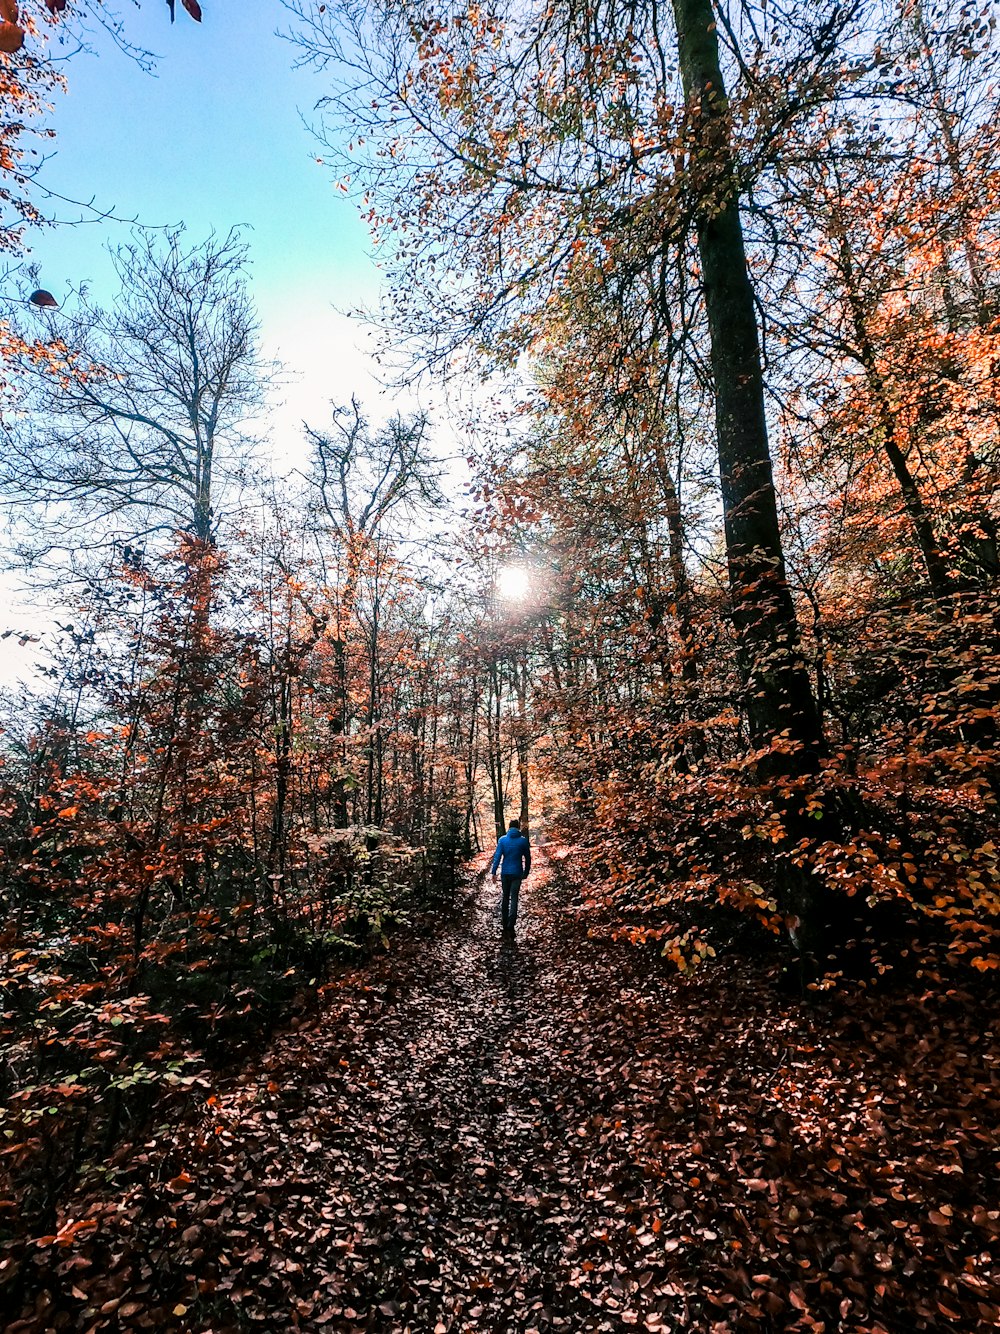 person in blue jacket walking on brown dried leaves during daytime